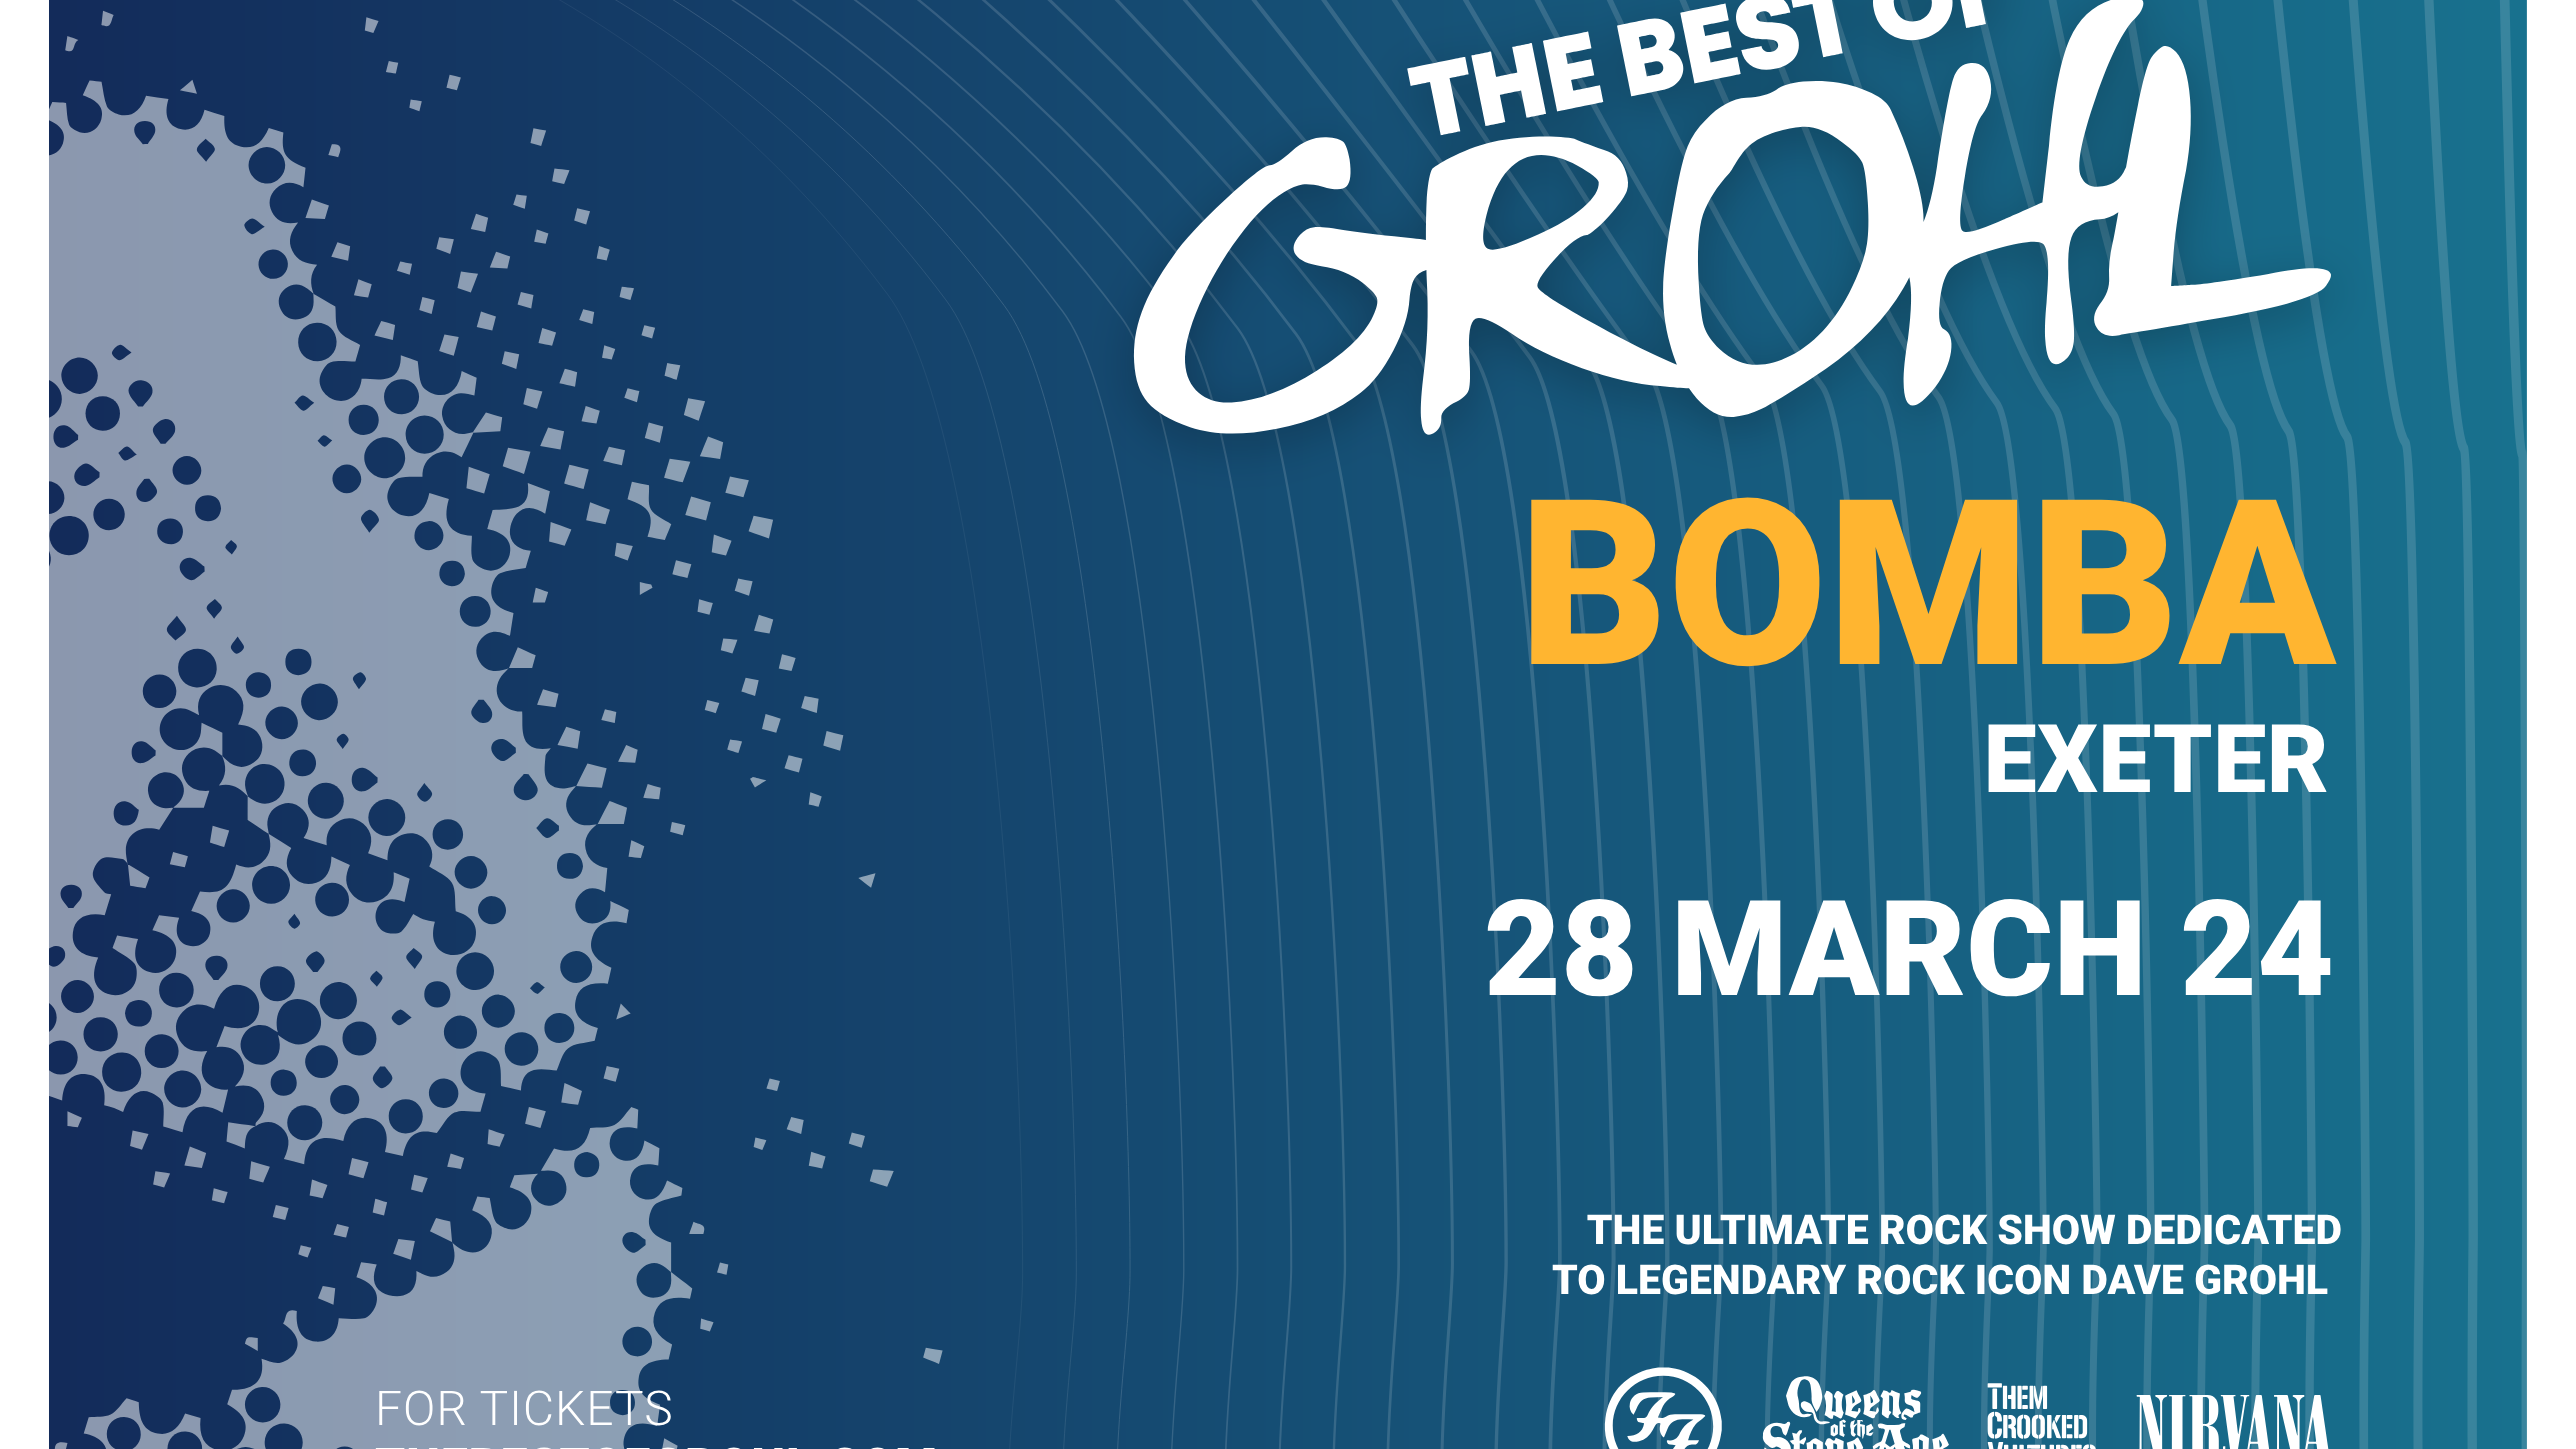 The Best Of Grohl (Dave Grohl Tribute) live at Bomba, Exeter (FOO FIGHTERS, NIRVANA, QOTSA, THEM CROOKED VULTURES)